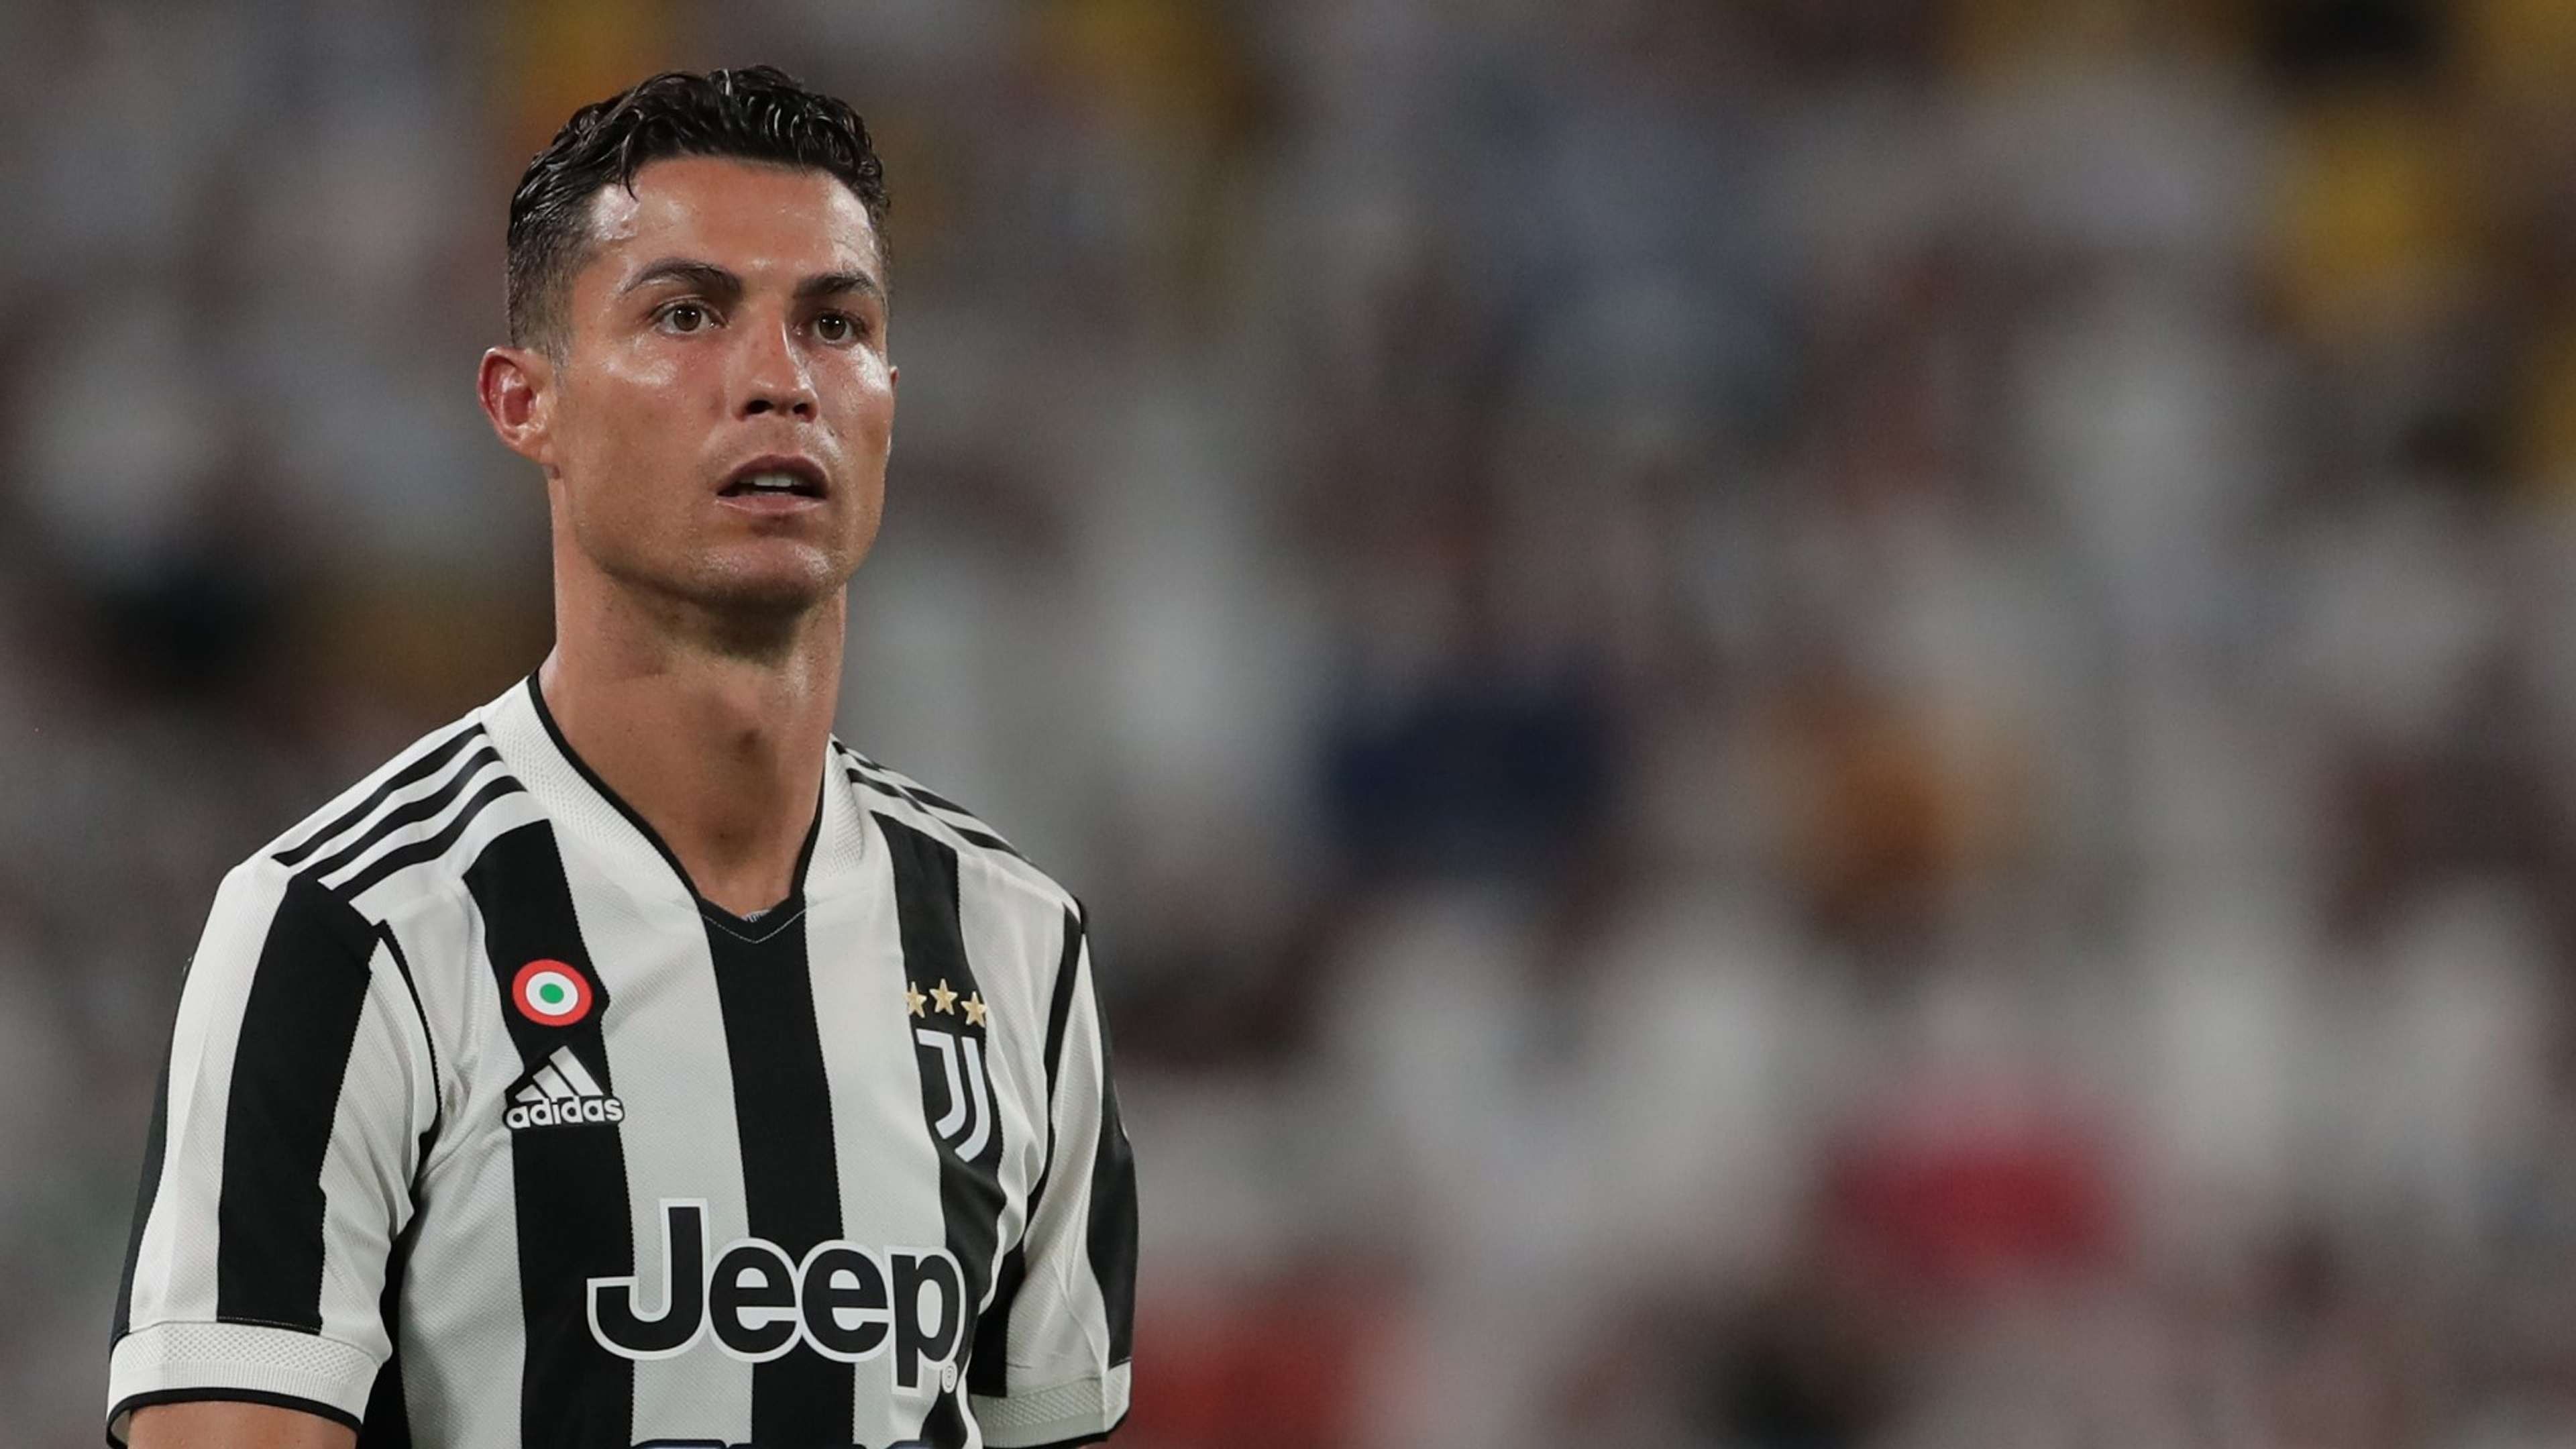 Juventus To Challenge Court Decision On Payments To Ronaldo